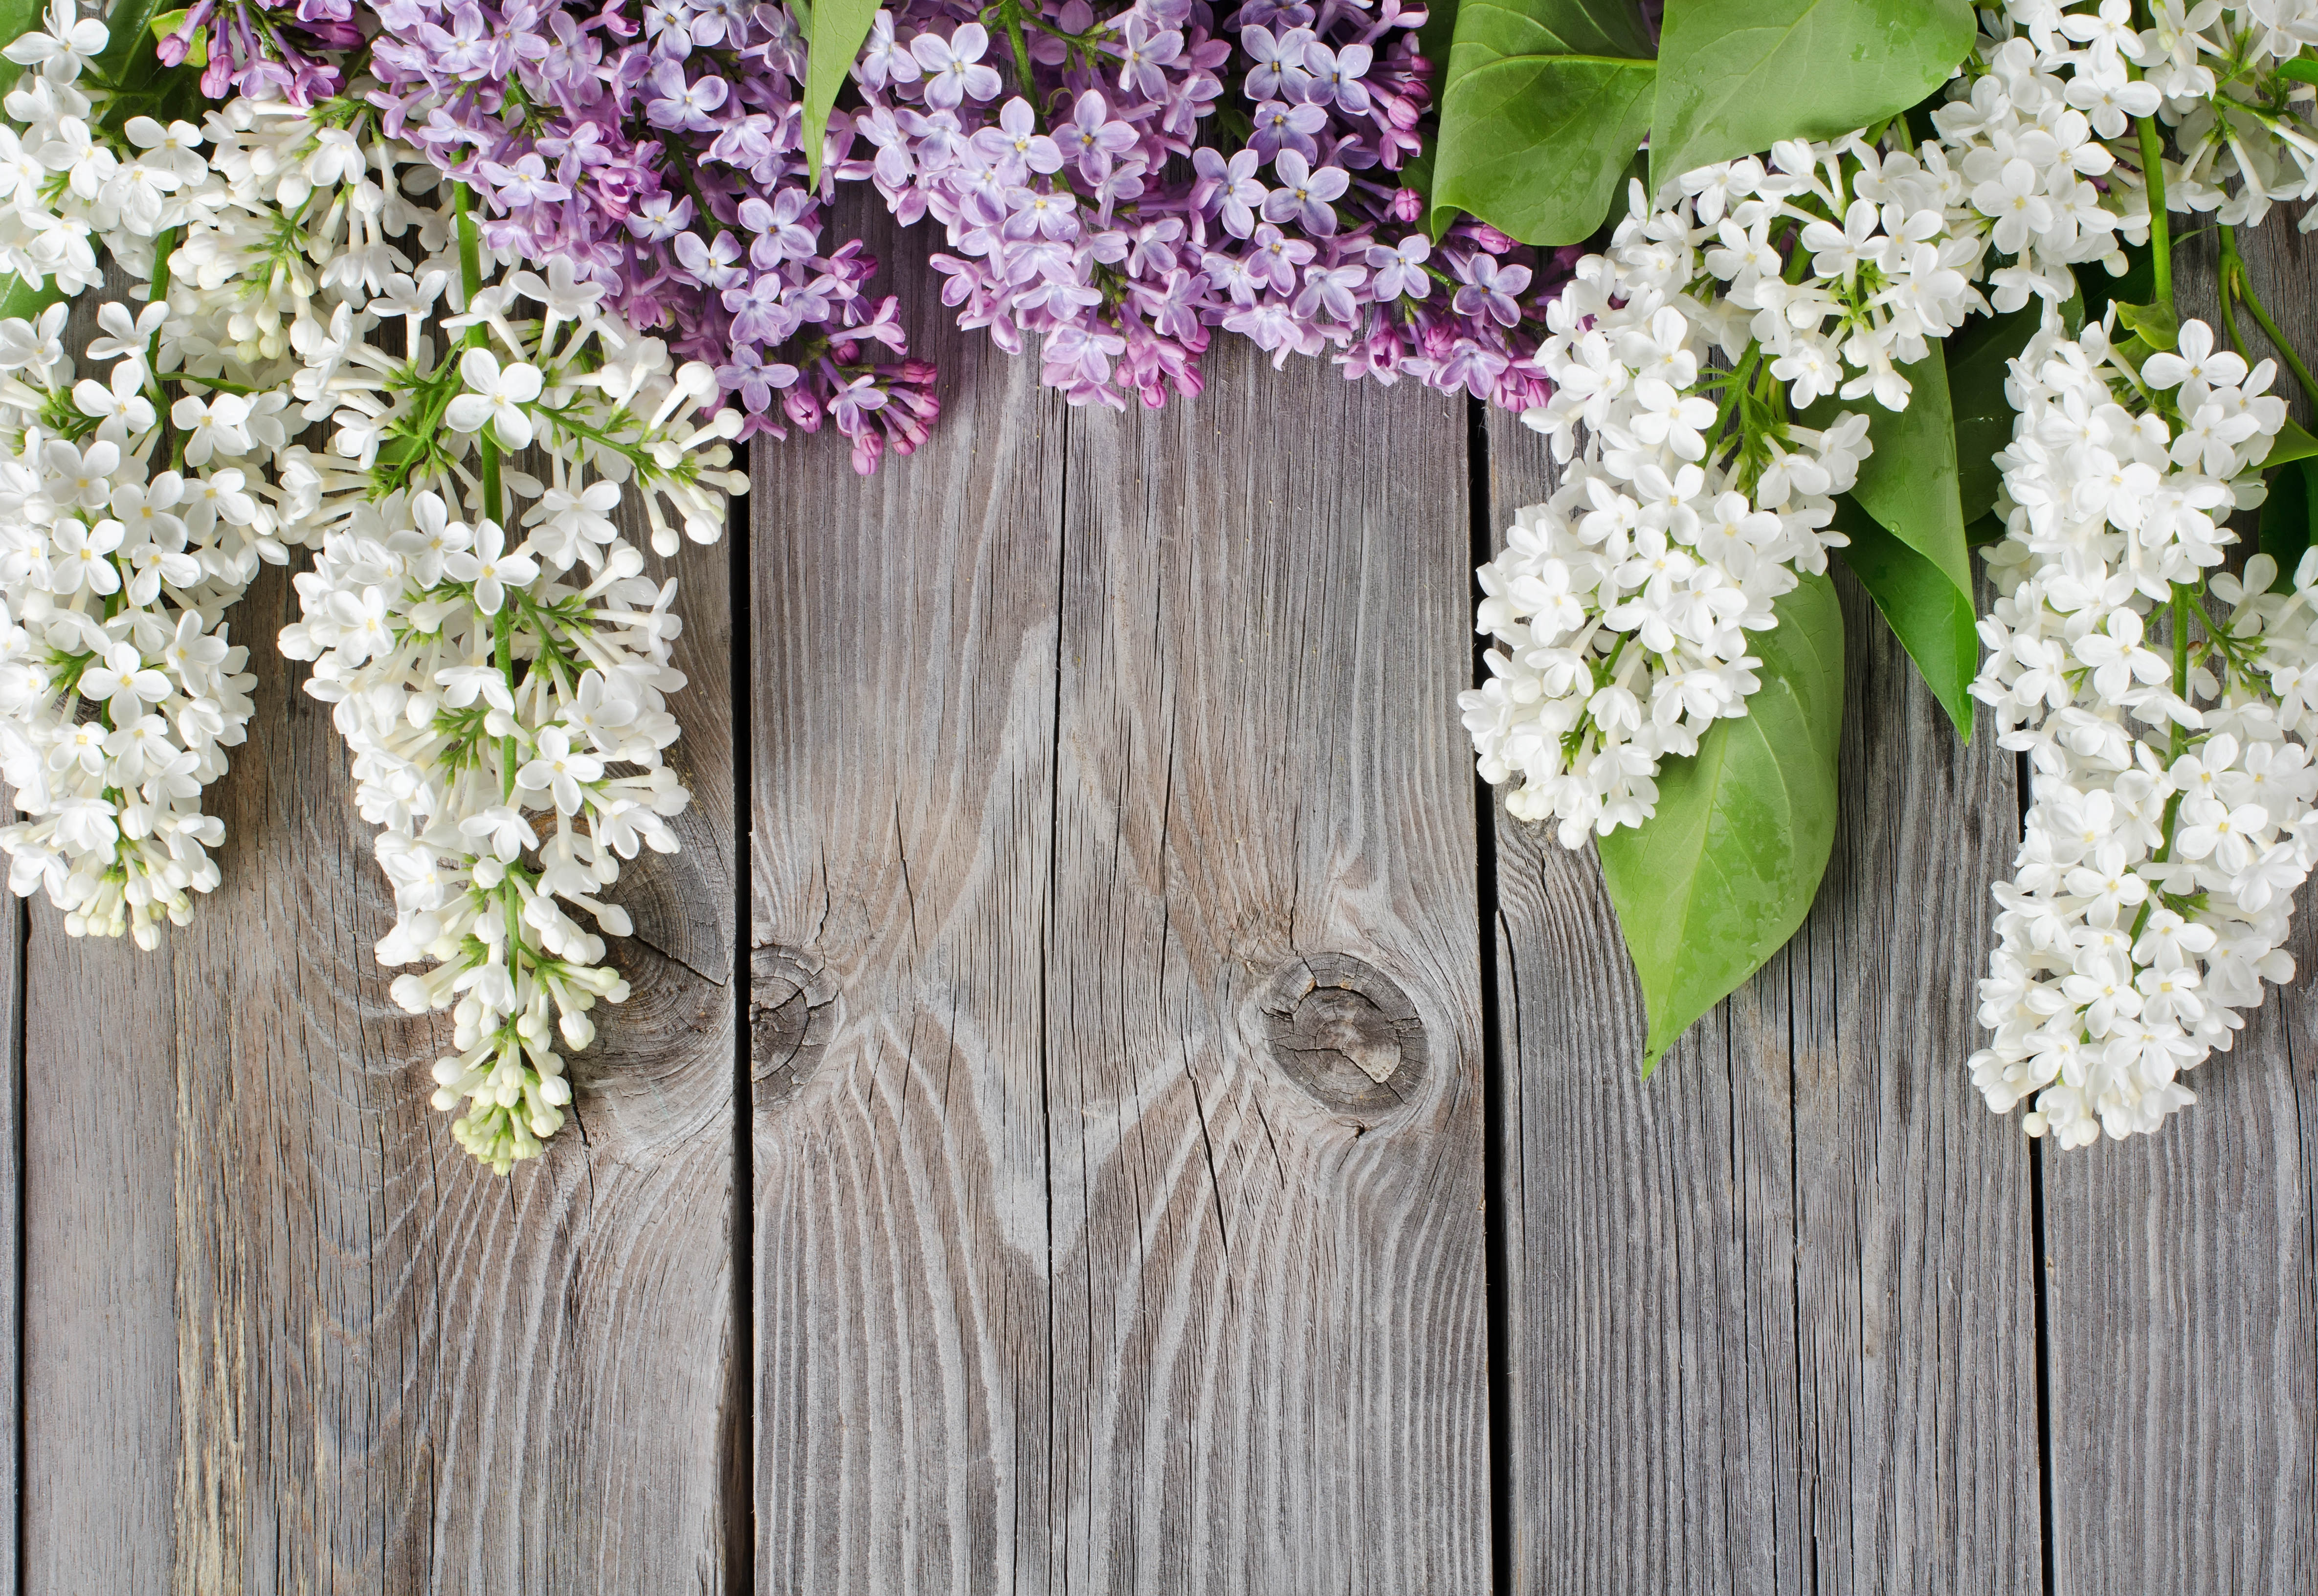 Wallpaper lilac board wood background wallpapers flowers   download